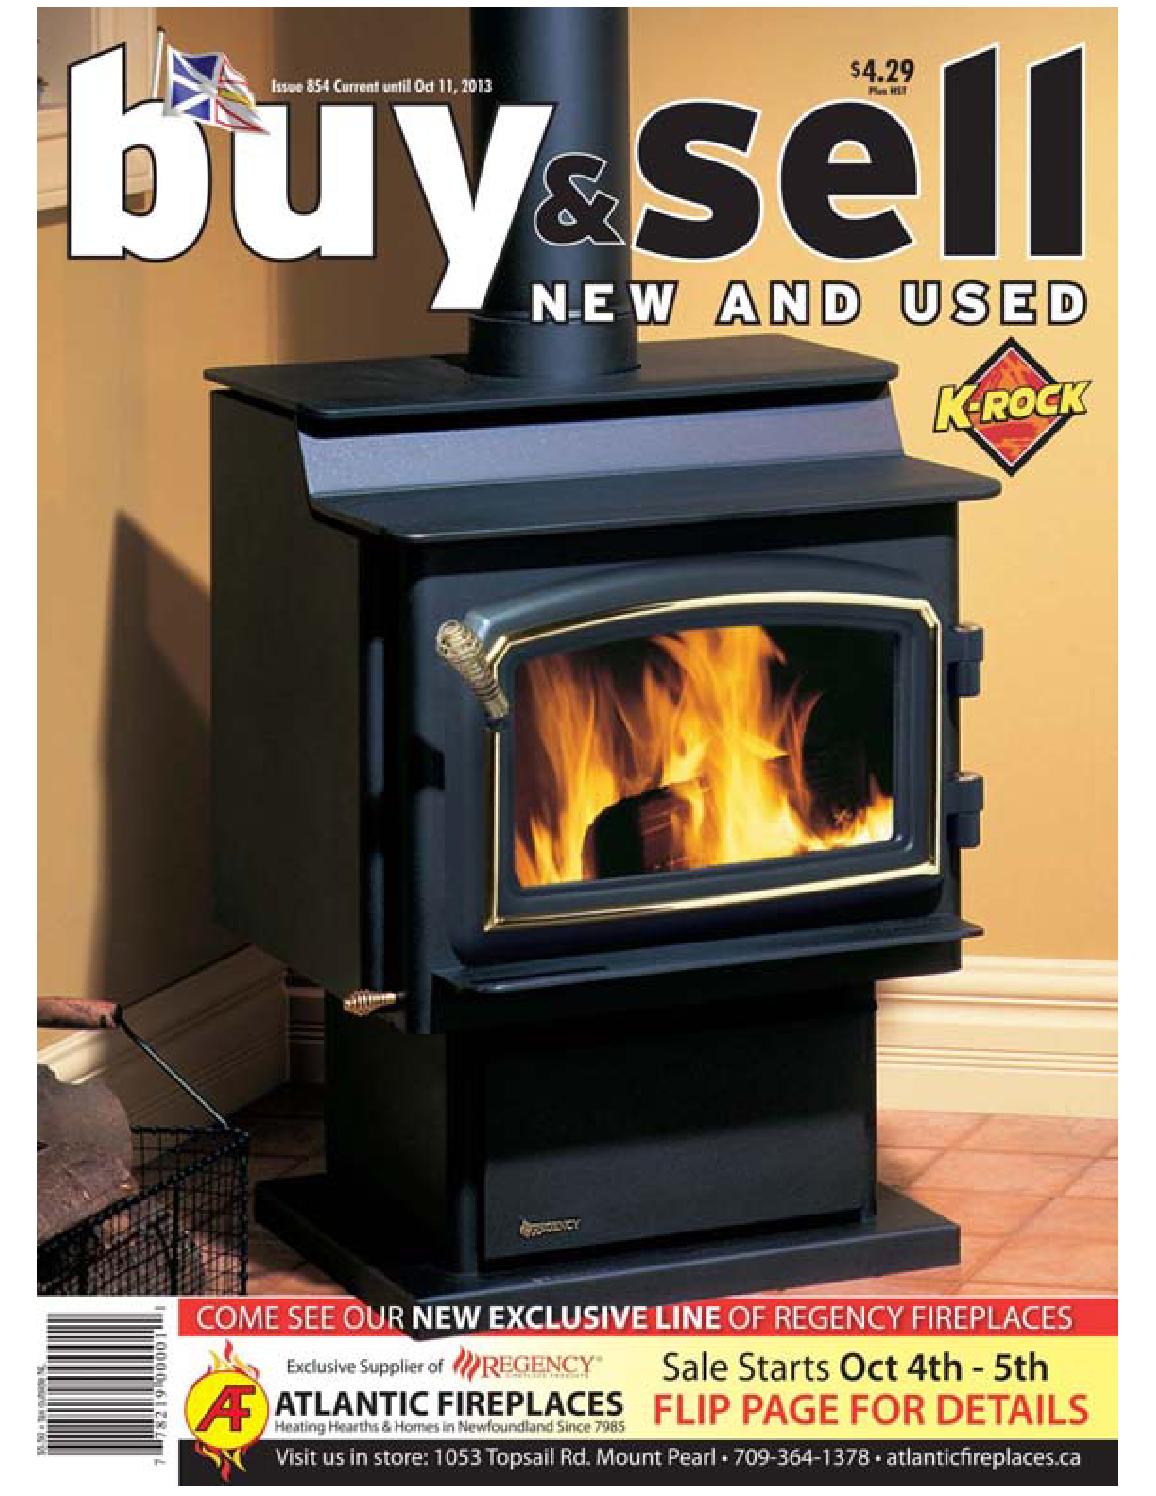 Fireplace Store Colorado Springs New the Nl Buy and Sell Magazine issue 854 by Nl Buy Sell issuu